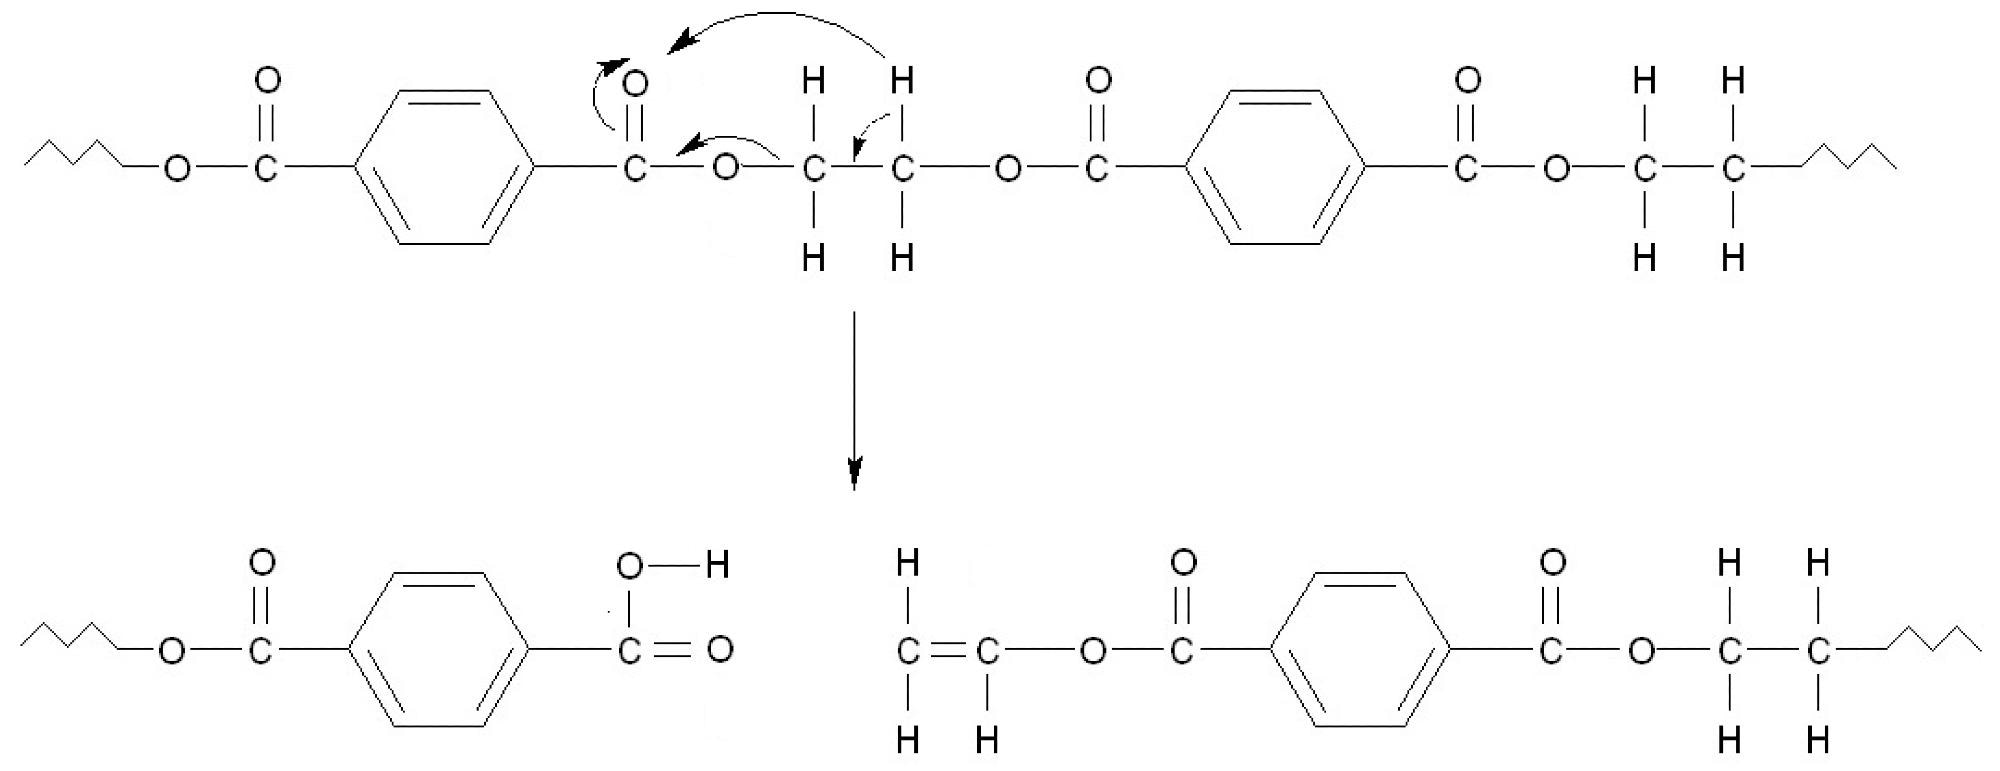 Schematic PET decomposition according to Norrish type reaction II. As a result, during subsequent reactions, terephthalic acid and derivatives containing vinyl group are formed.